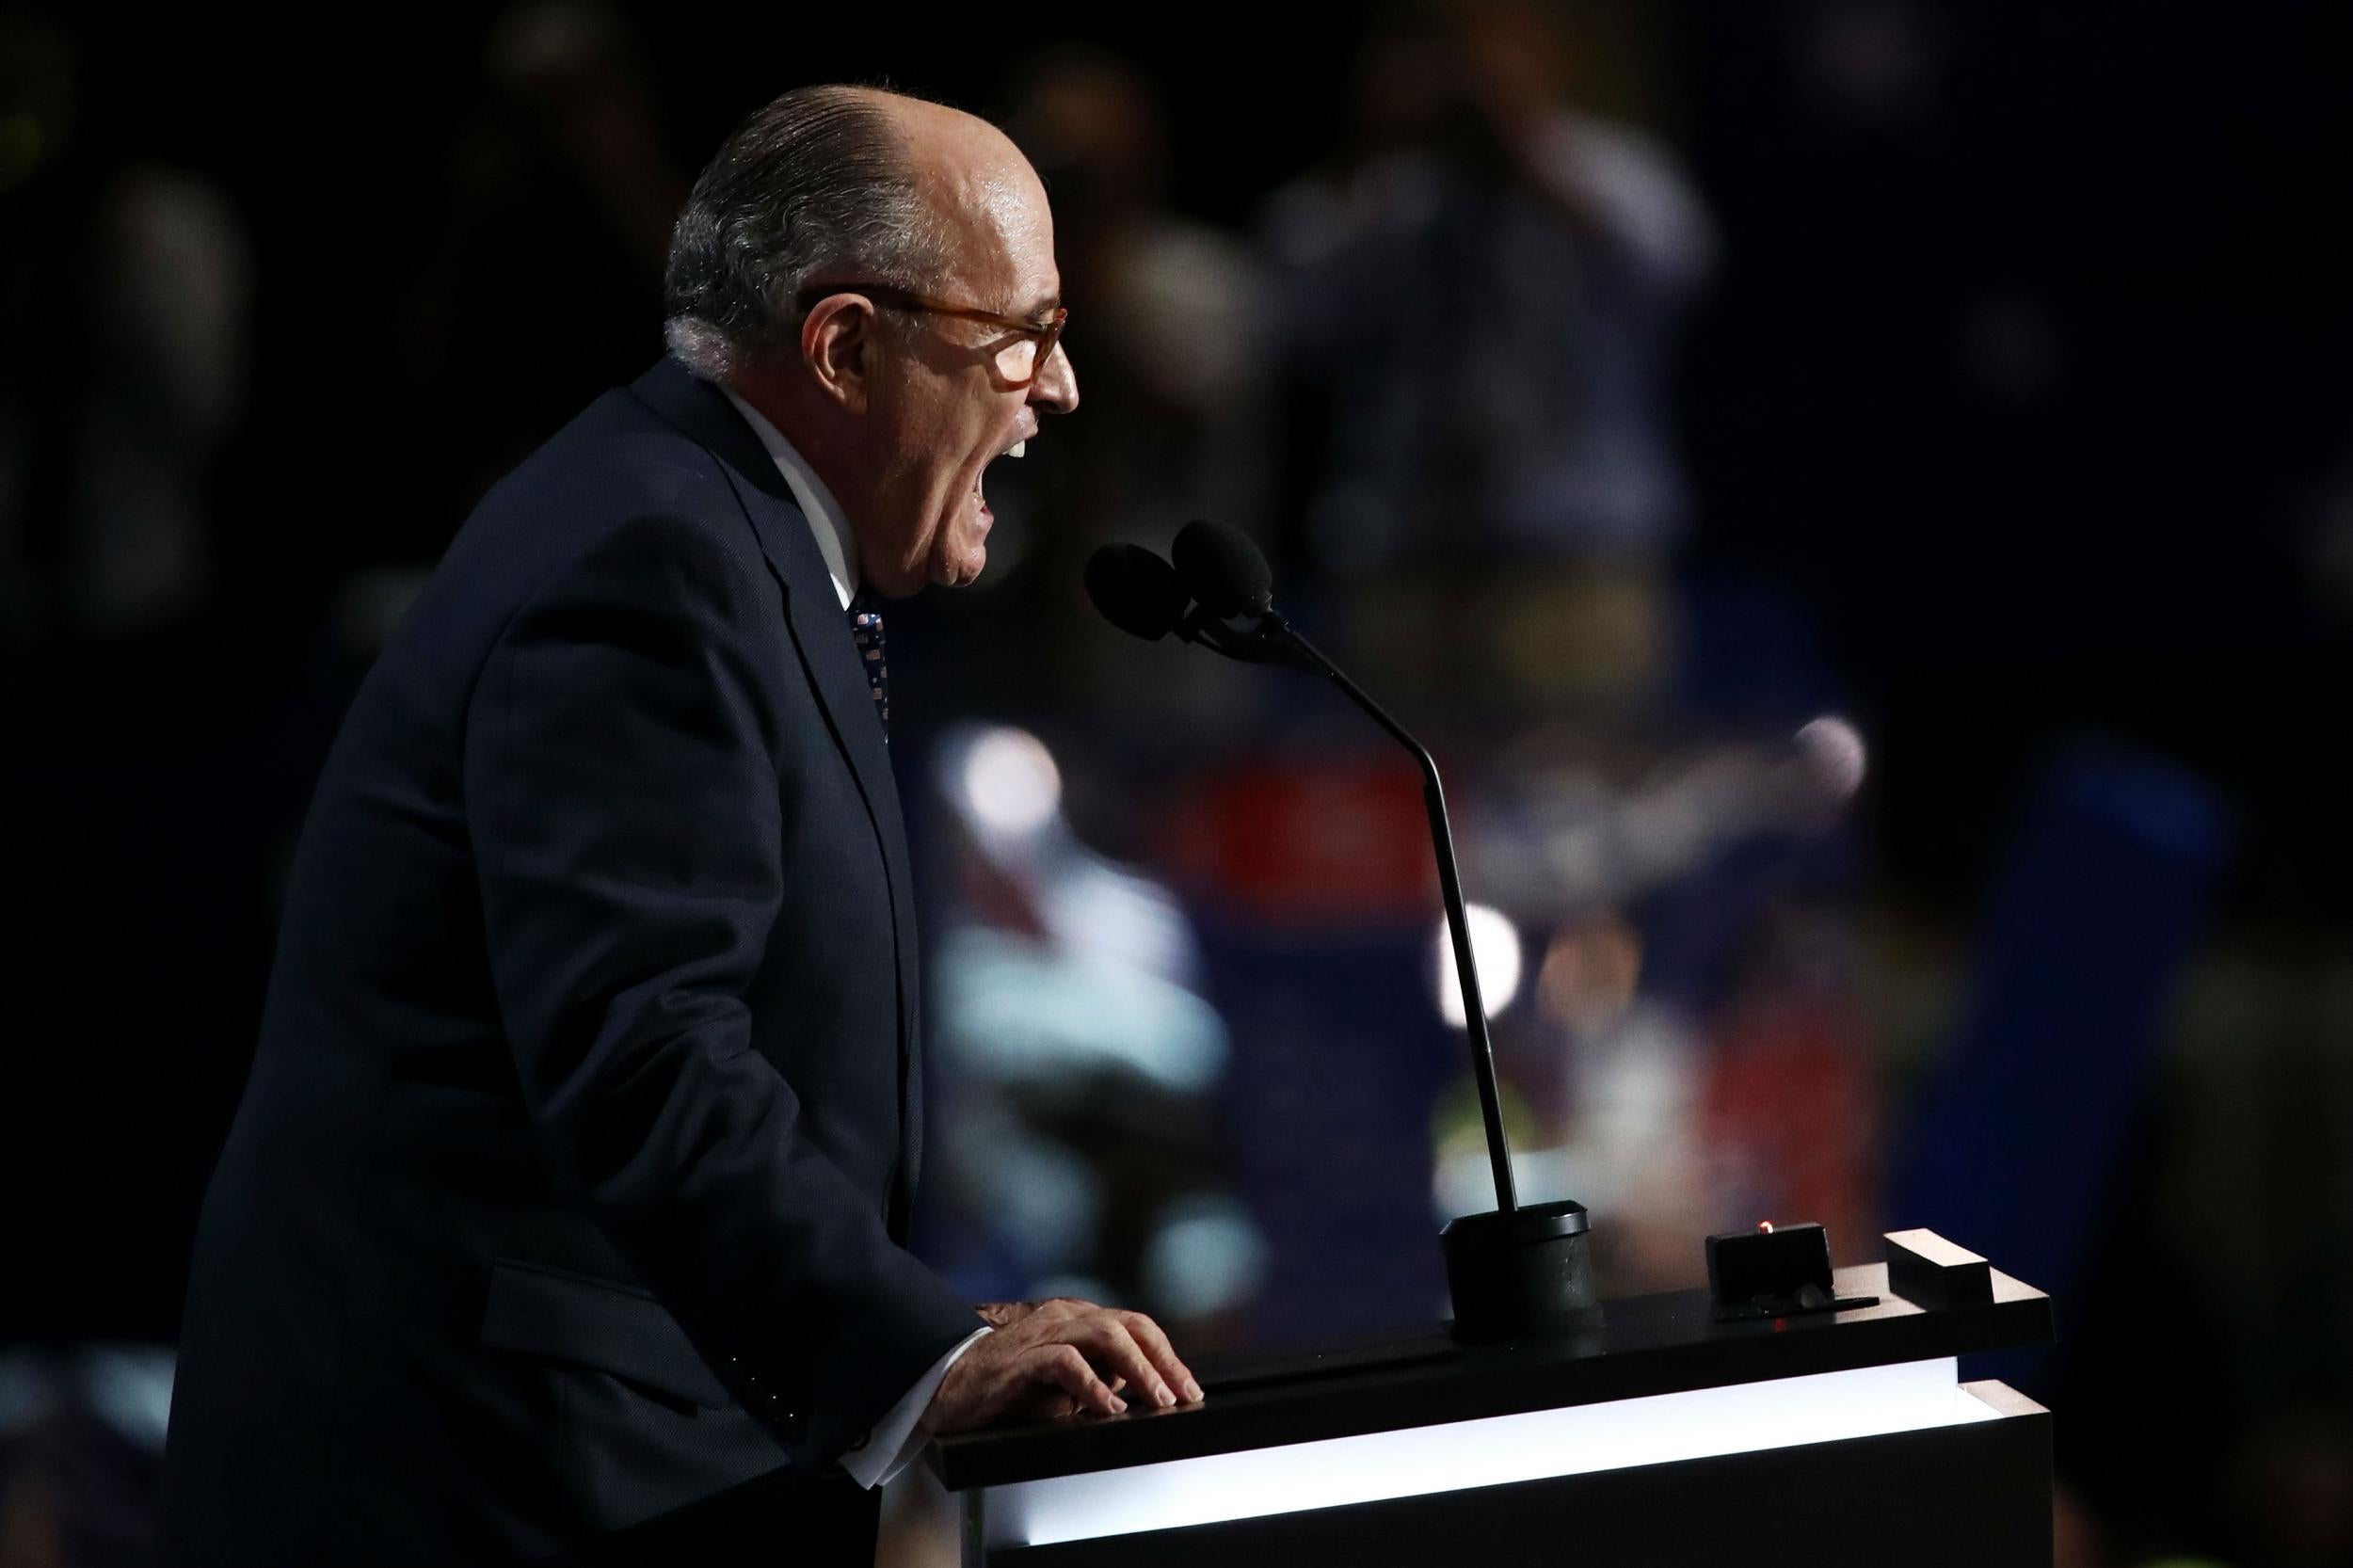 Rudy Giuliani coughed his way through a Fox News interview in the days following Donald Trump's coronavirus diagnosis